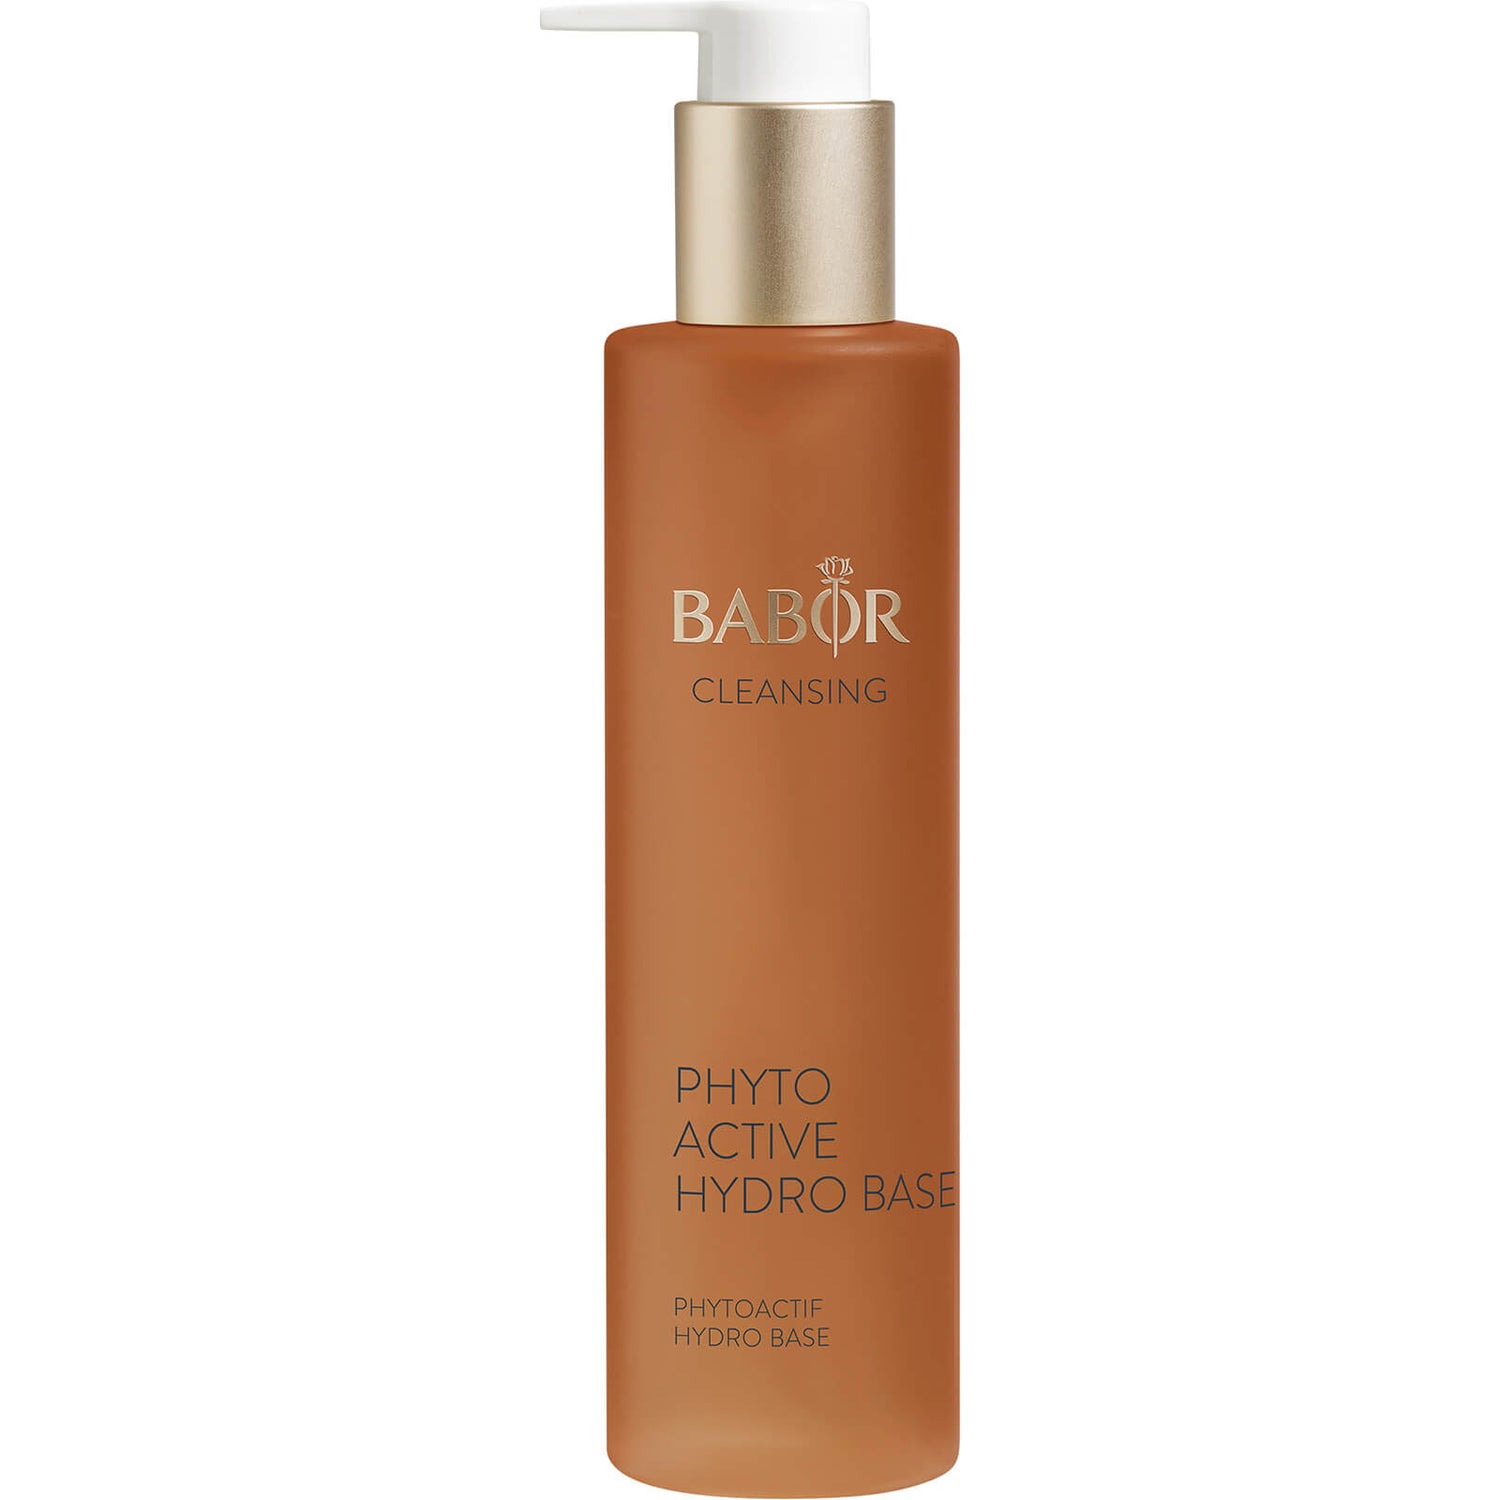 BABOR Cleansing Phytoactive - Hydro Base 100ml